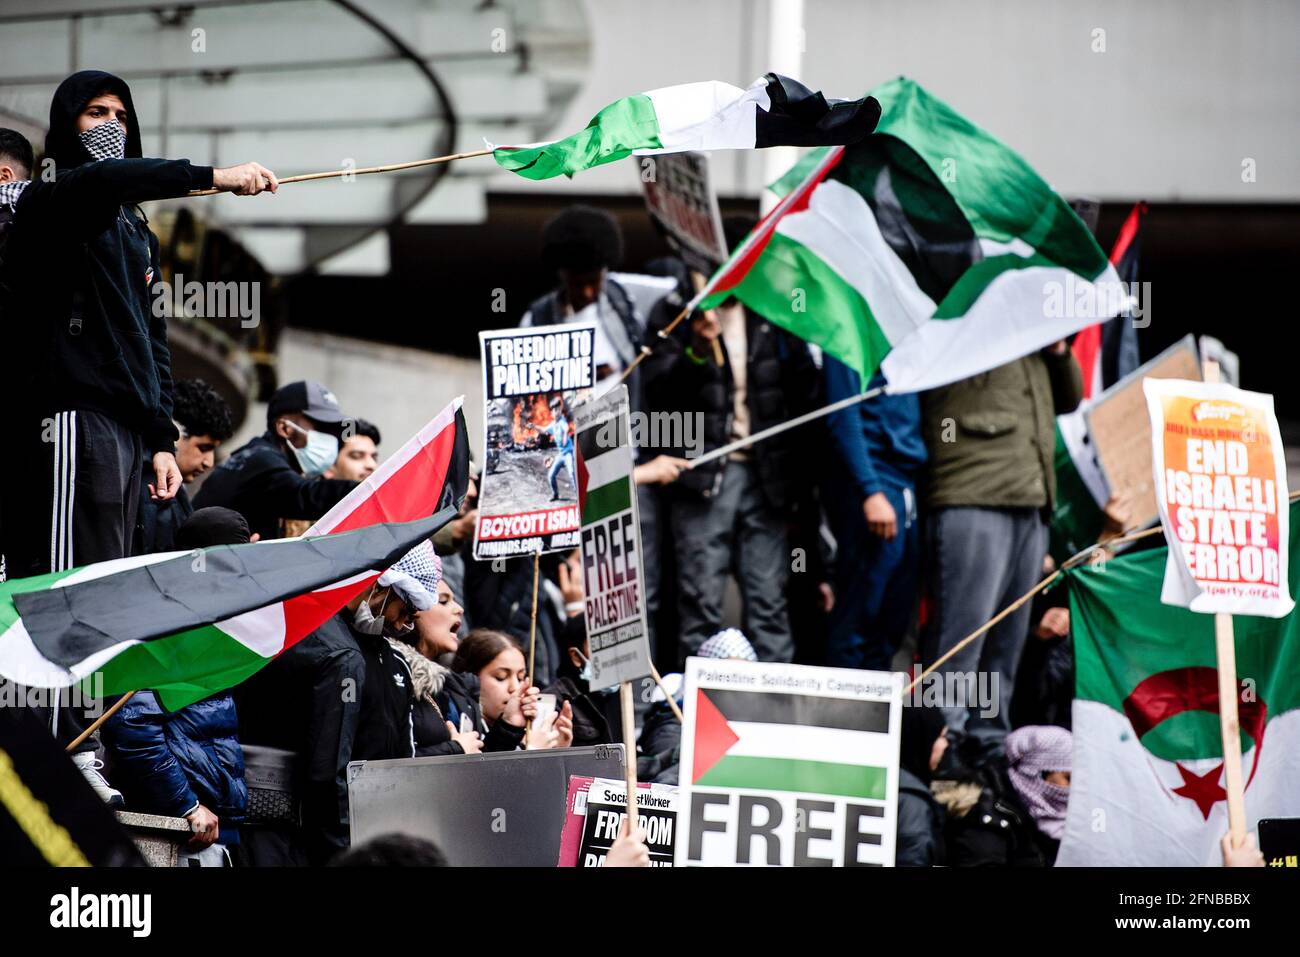 London, UK. 15th May, 2021. Protesters hold Palestinian flags and placards at the Israeli Embassy in London, in solidarity with Palestine as many Israeli cities are in conflict between Jewish and Arab people. Credit: SOPA Images Limited/Alamy Live News Stock Photo